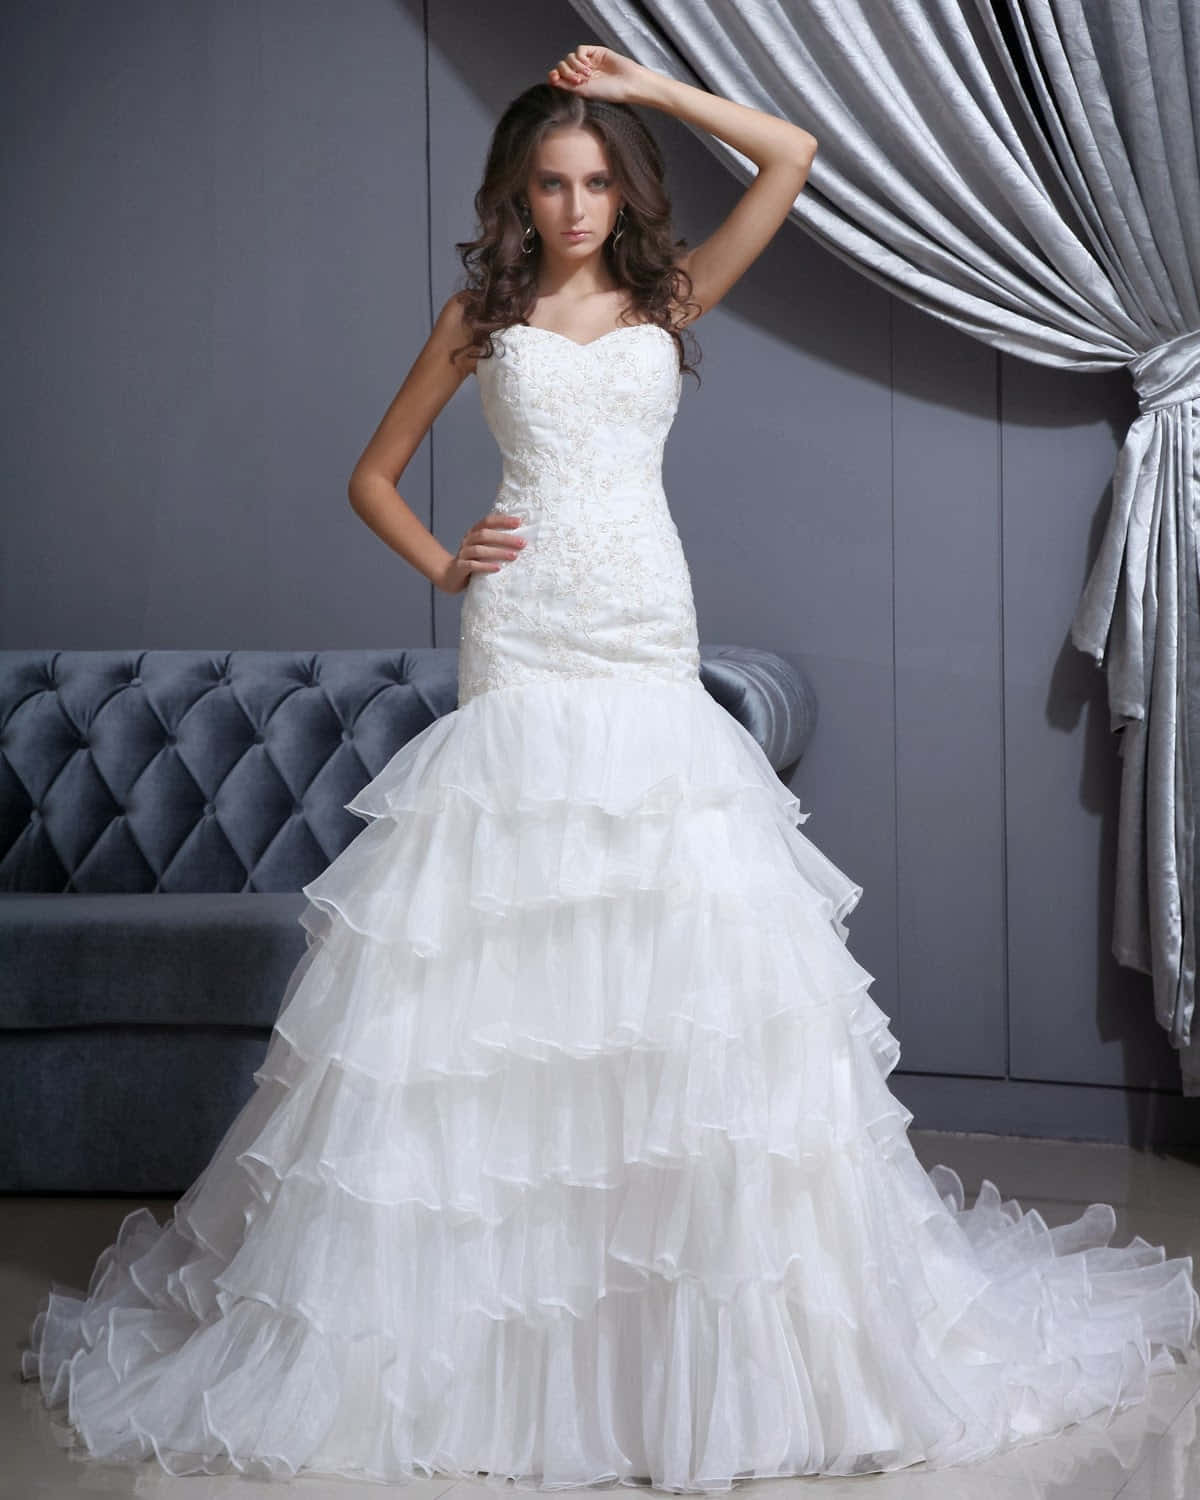 "Put the Finishing Touches on Your Special Day with a Beautiful Wedding Gown."